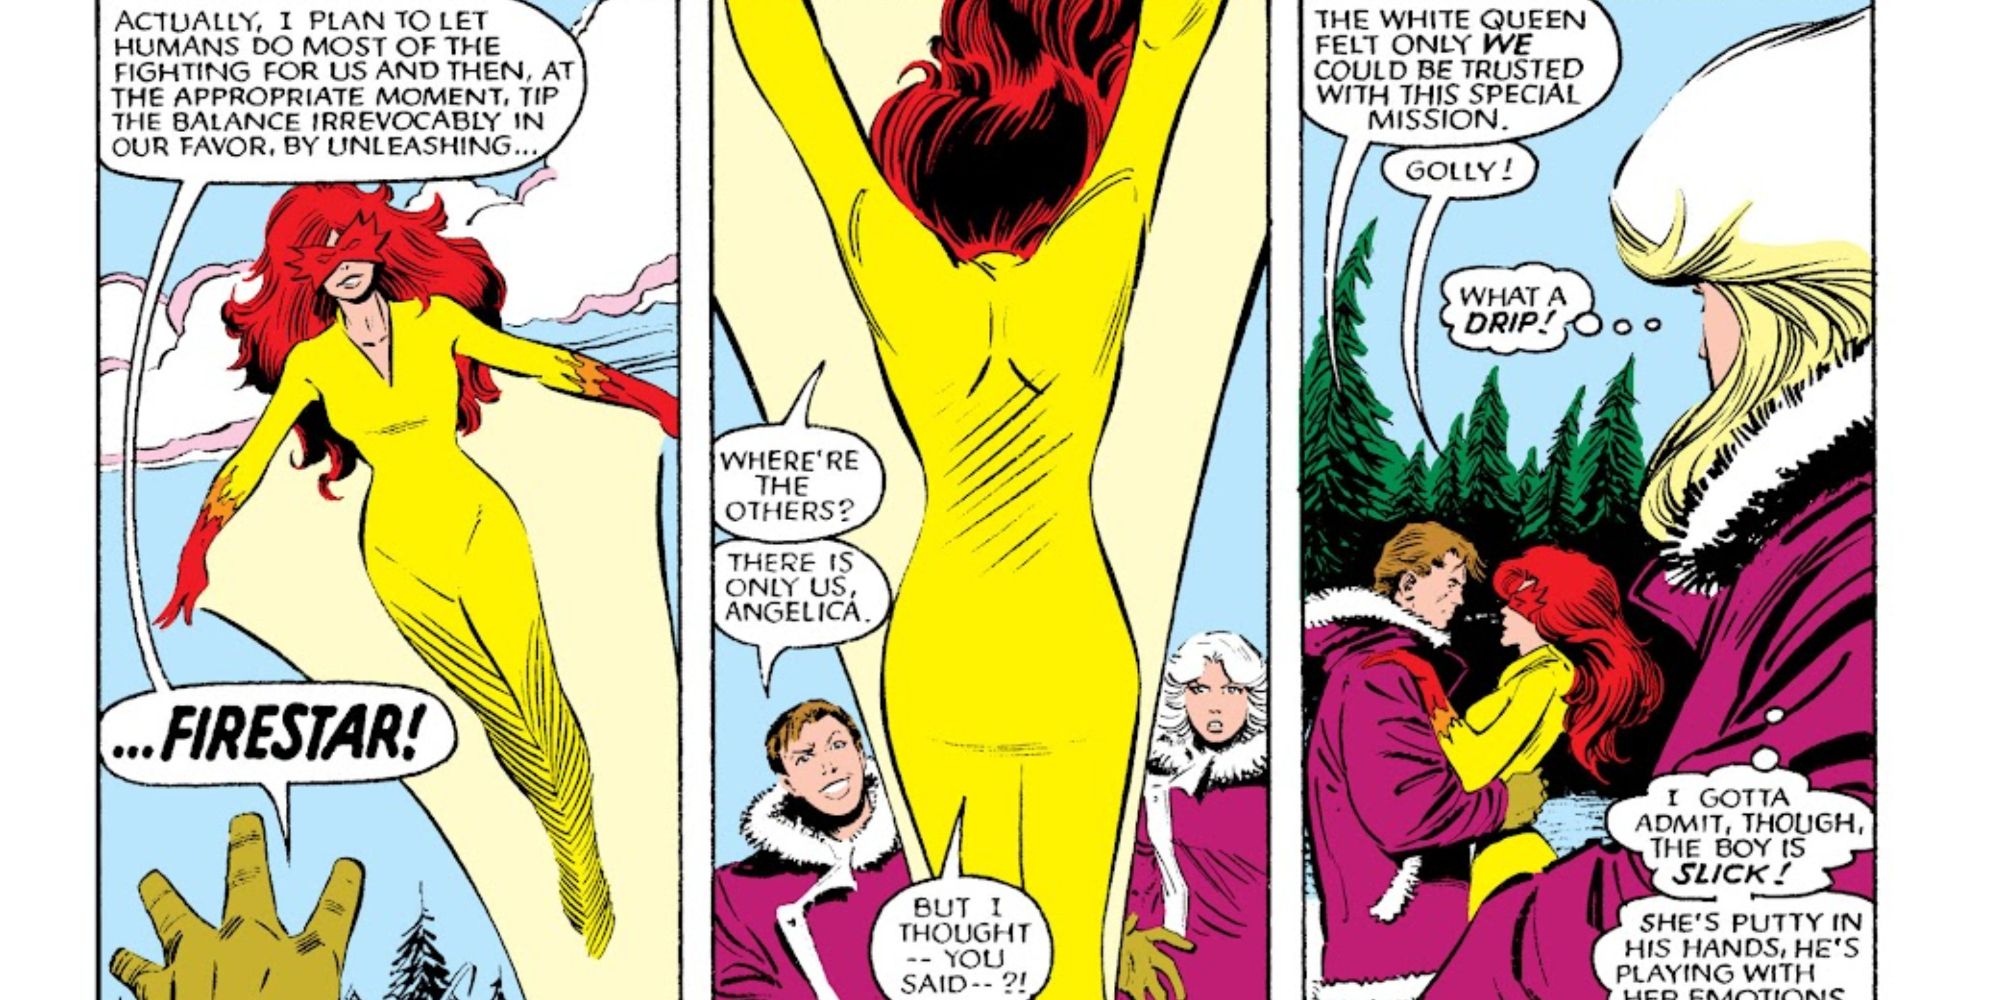 Firestar makes her first appearance in Marvel Comics.